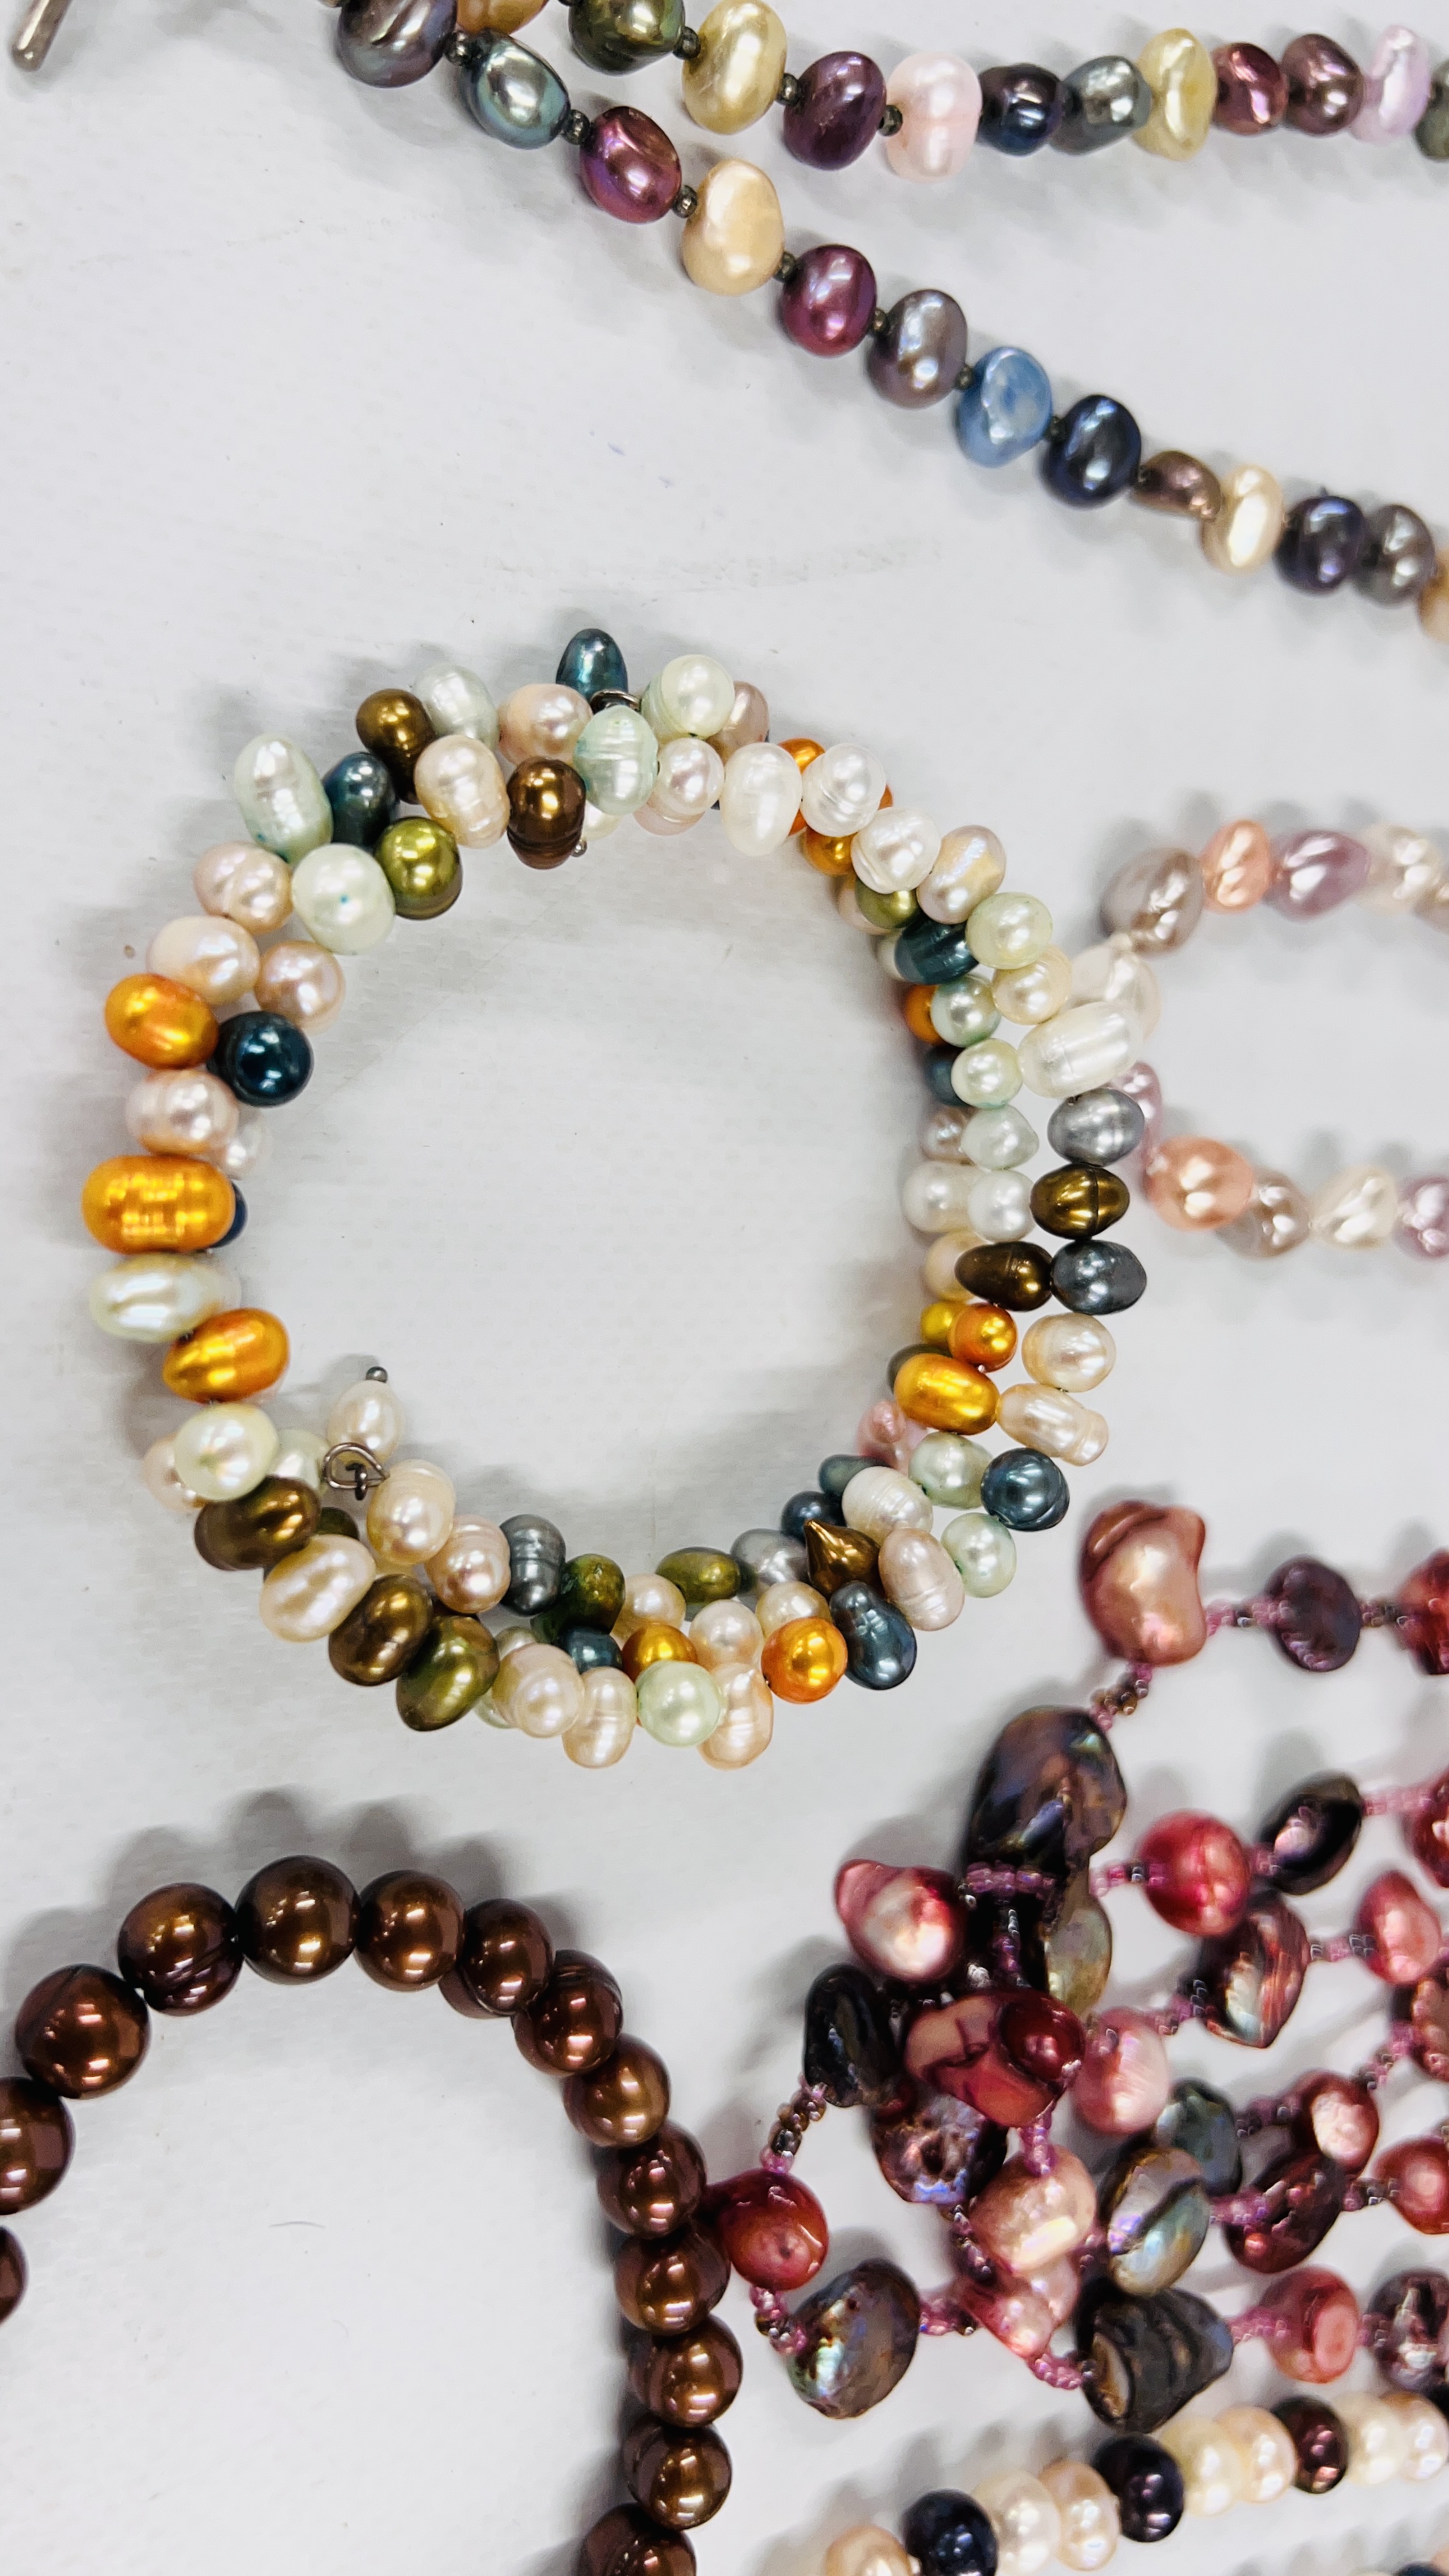 SELECTION OF CULTIVATED PEARL NECKLACES. - Image 2 of 4